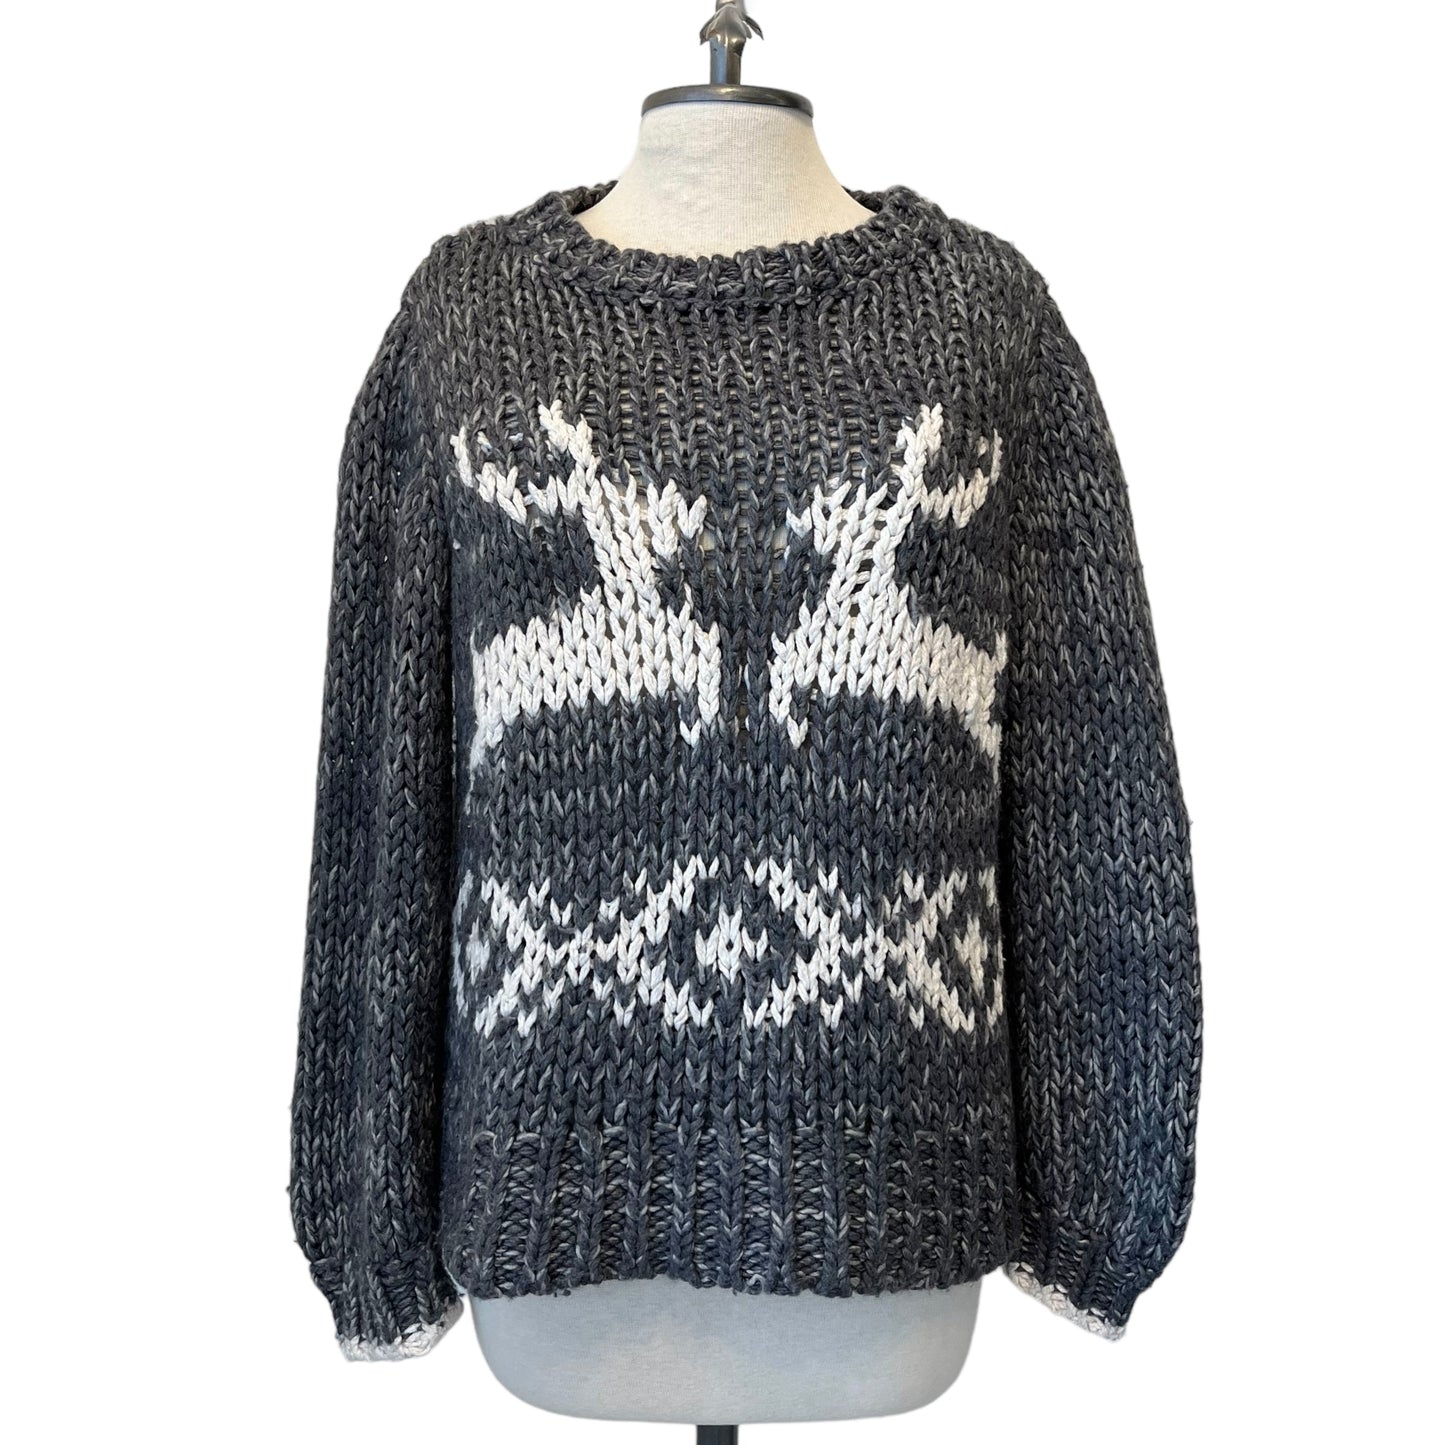 Free People Sweater - Small